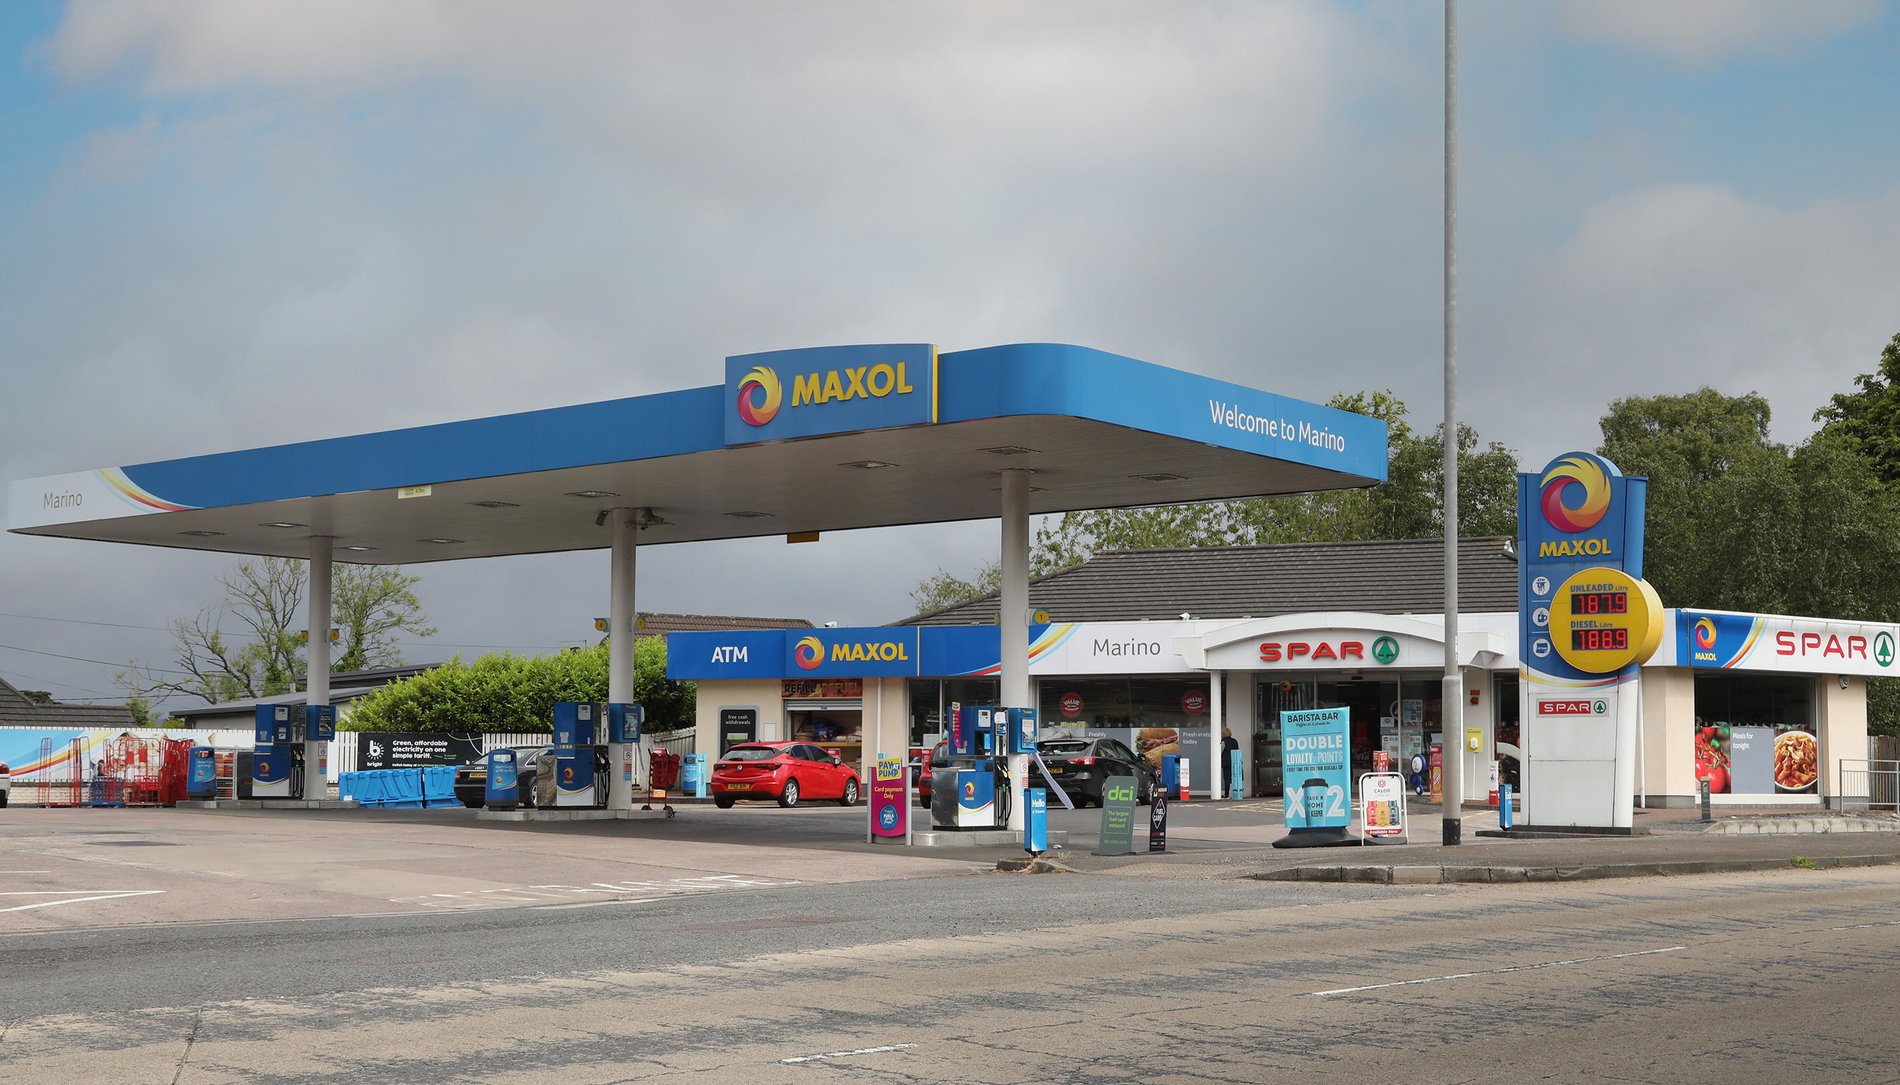 Maxol Service Station Marino: stations in Down, Down